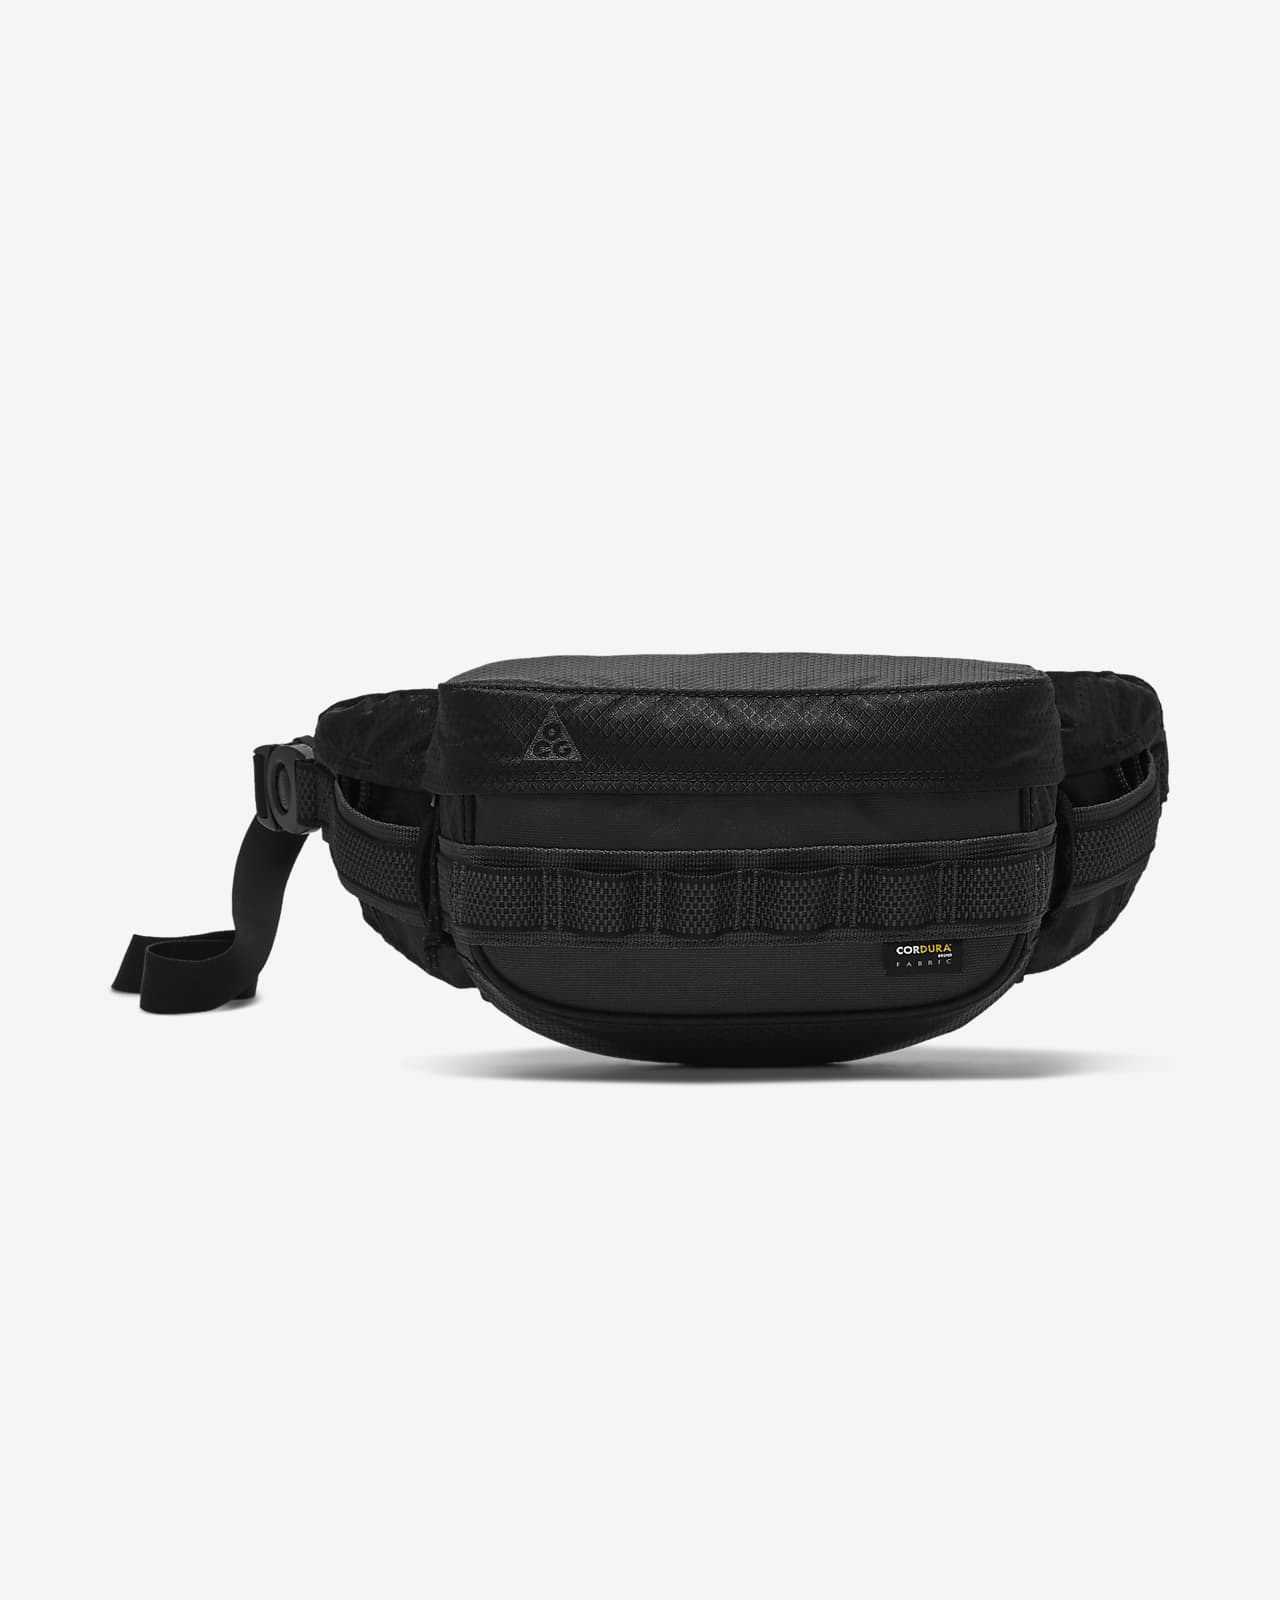 small nike fanny pack